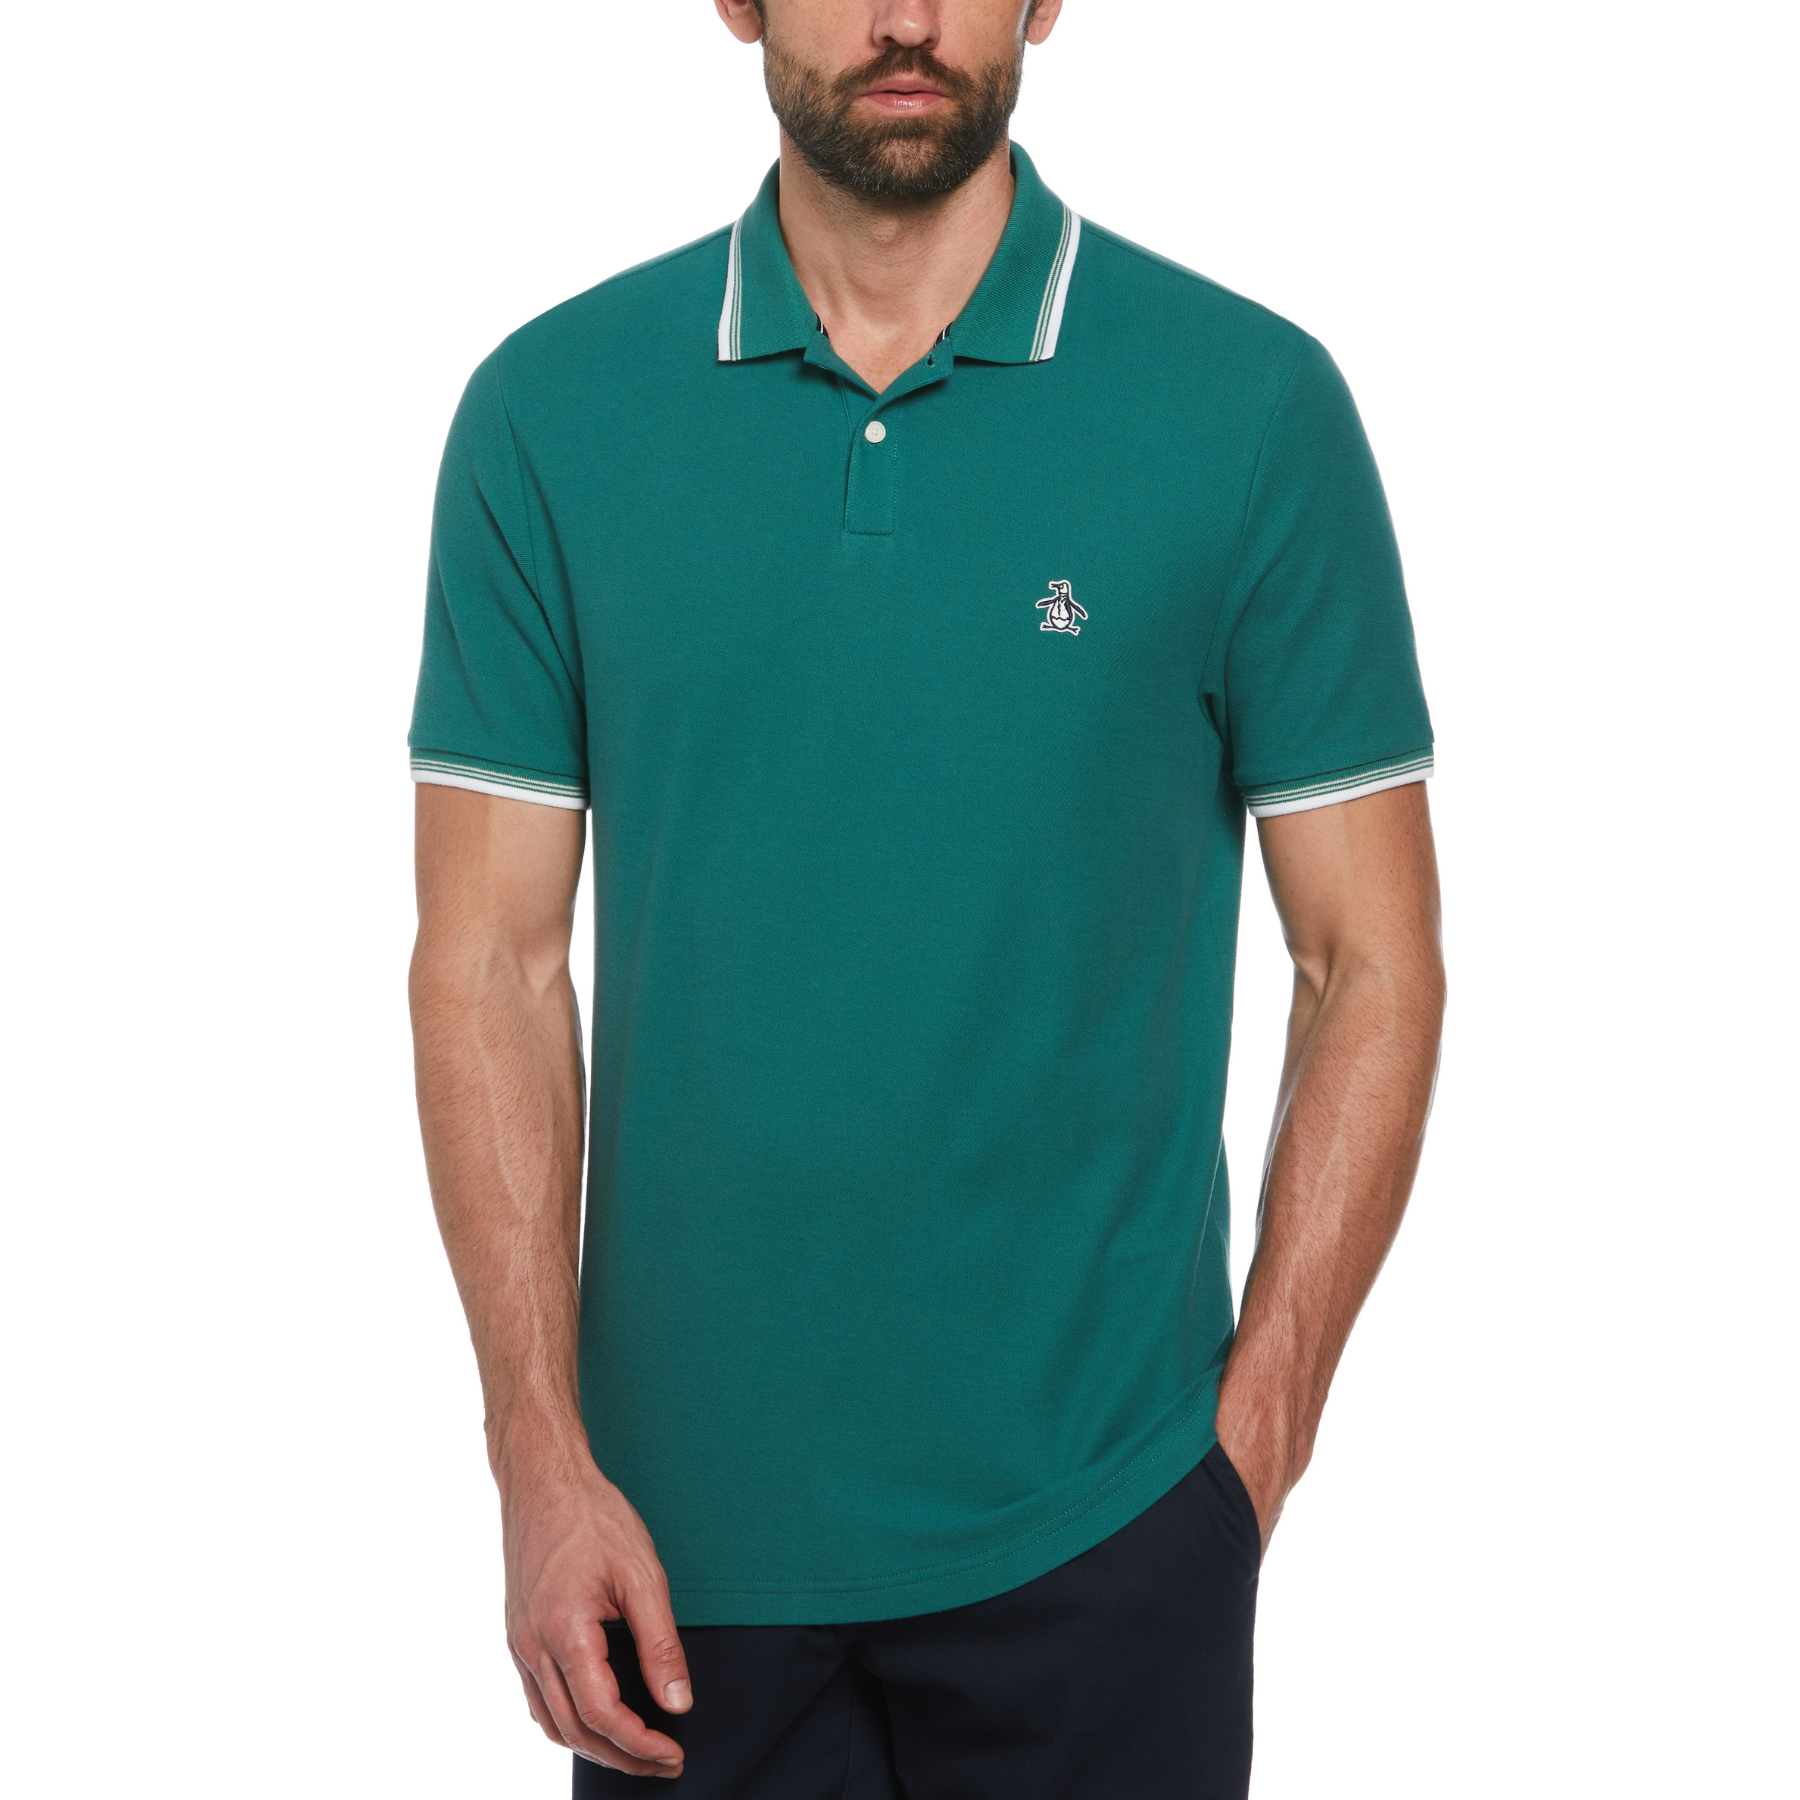 View Organic Cotton Pique Short Sleeve Polo Shirt With Tipped Collar In Ant information